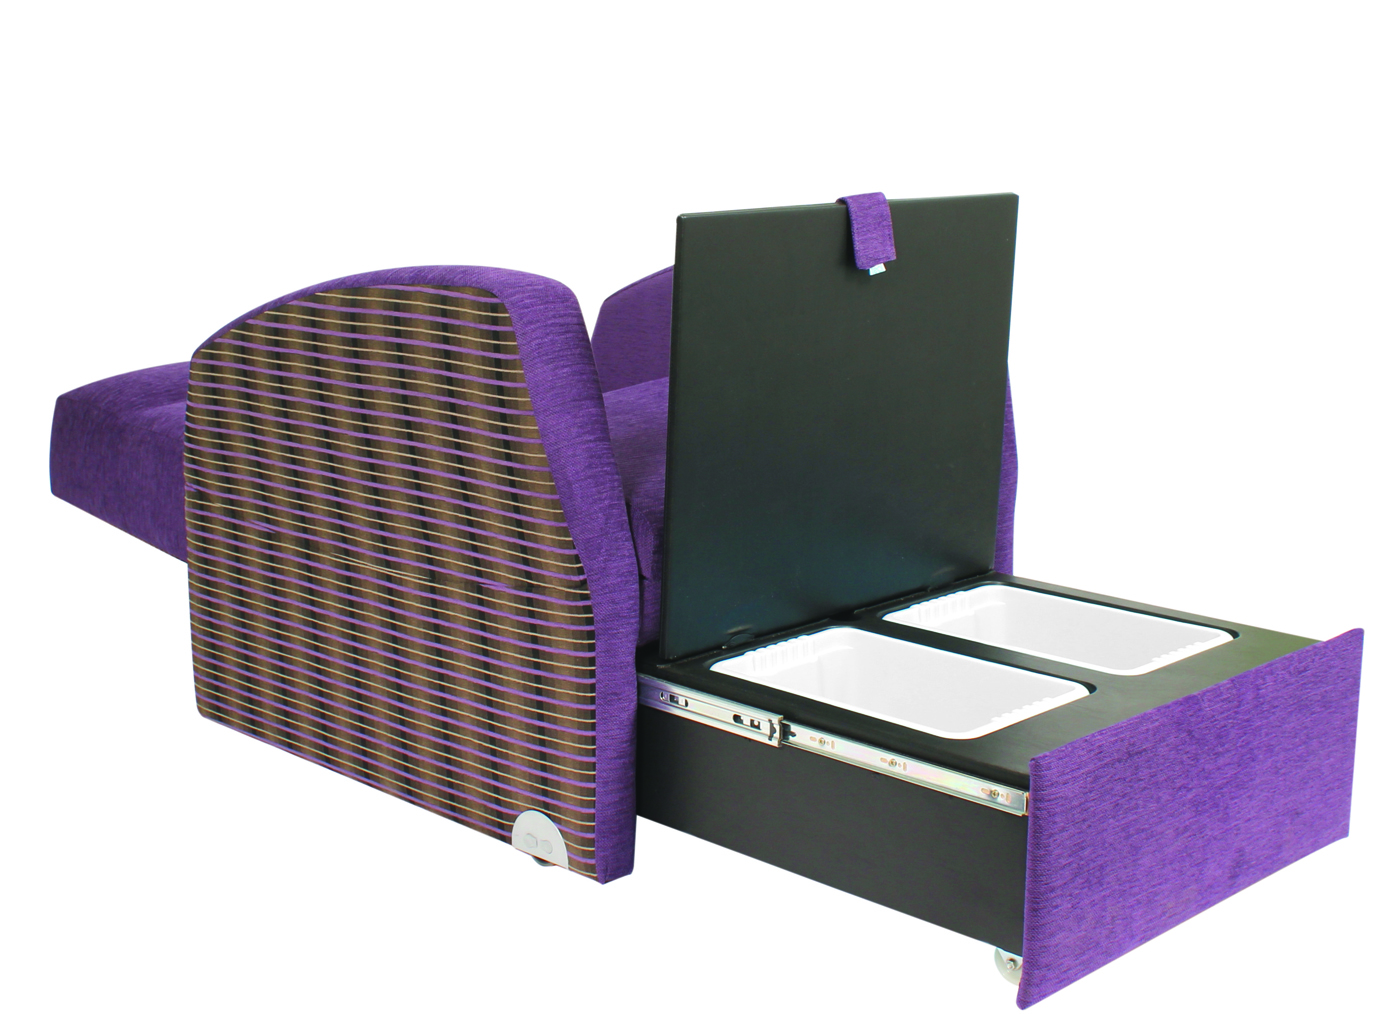 Teal Furniture was one of the winners for its Buddy day bed/attendance chair